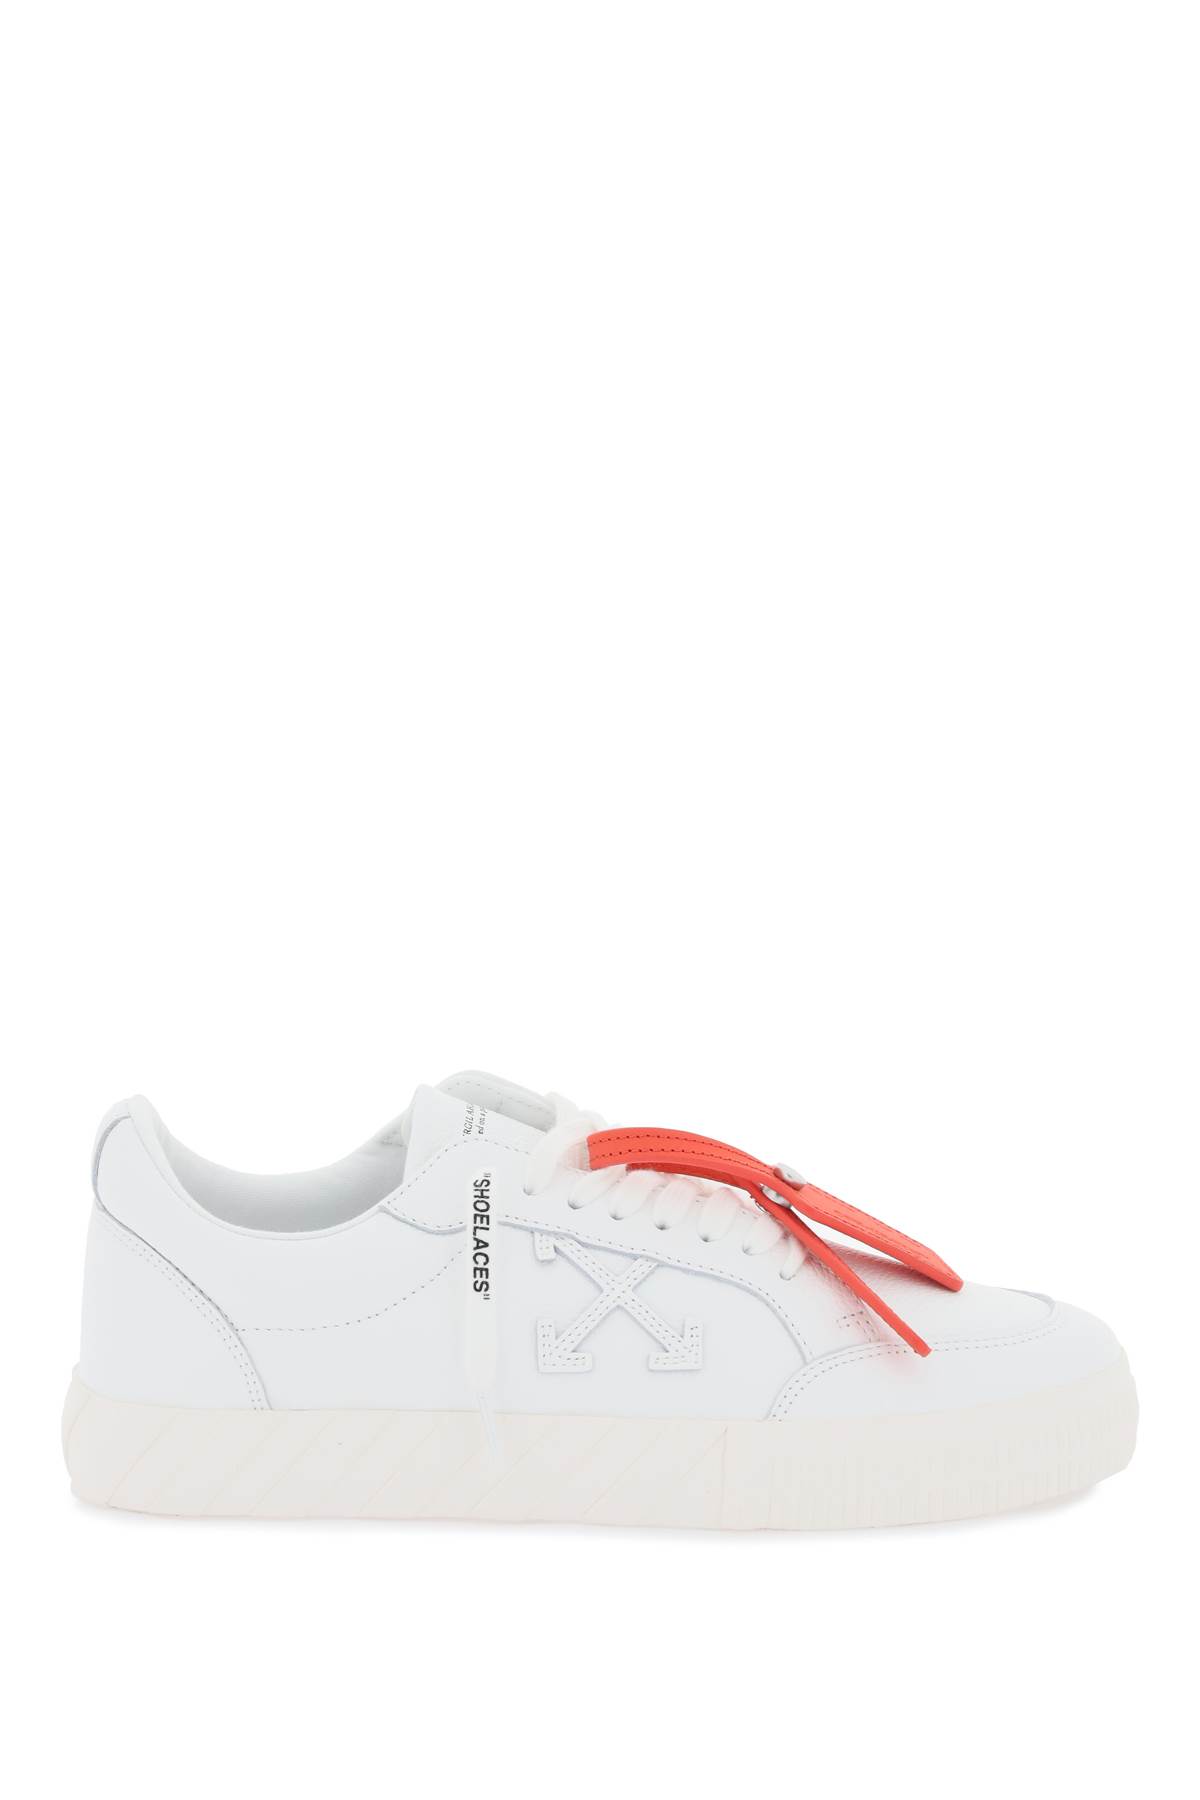 OFF-WHITE LEATHER LOW VULCANIZED SNEAKERS